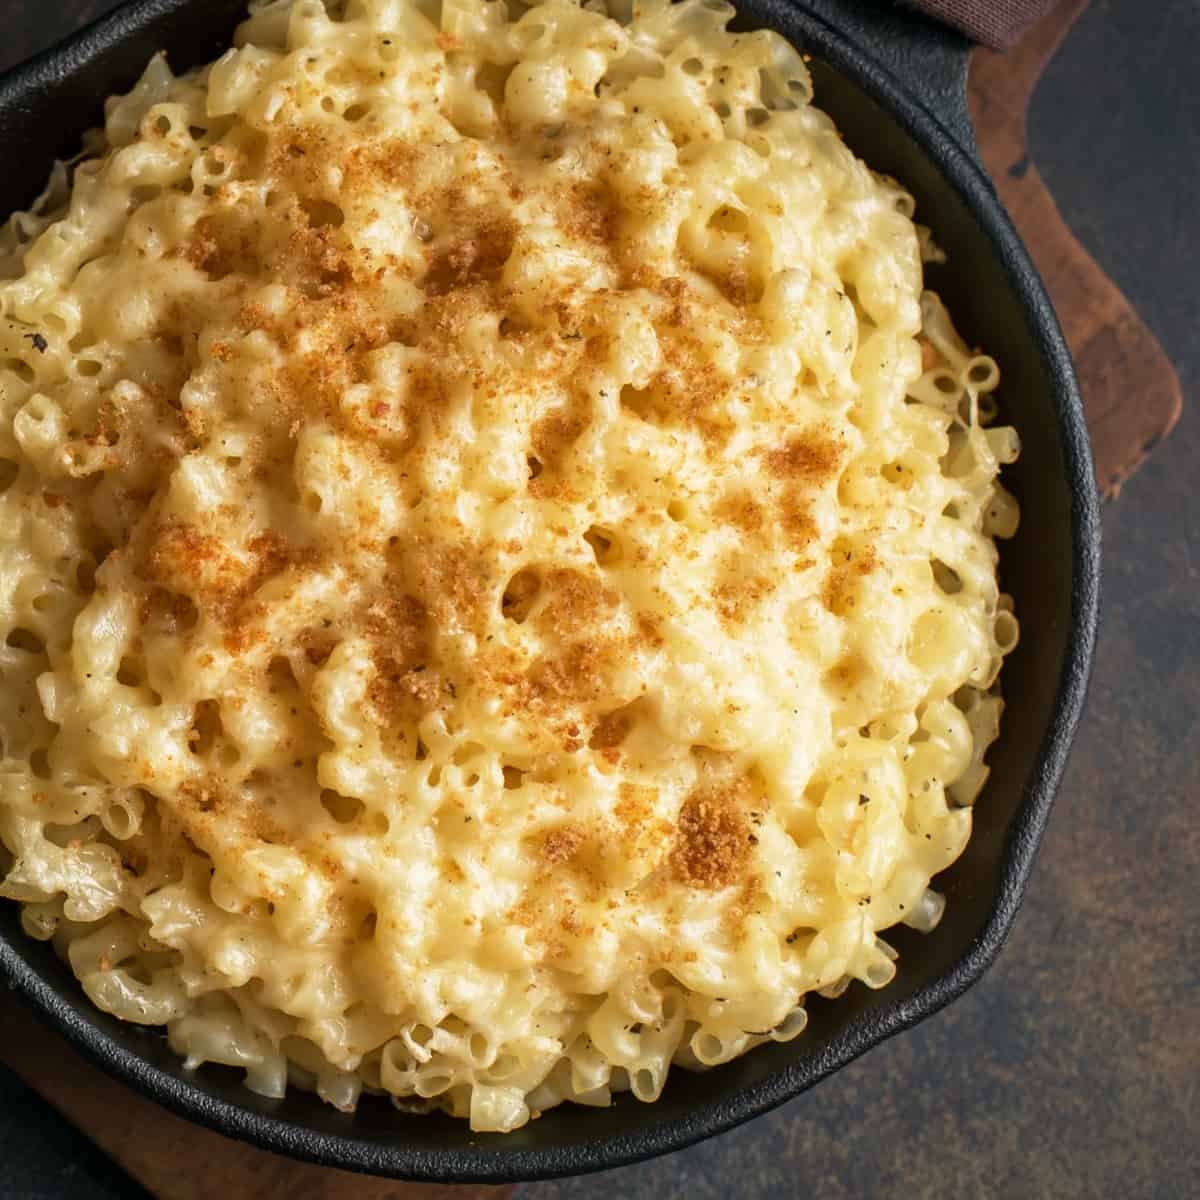 Skillet of macaroni in a smooth cheese sauce.